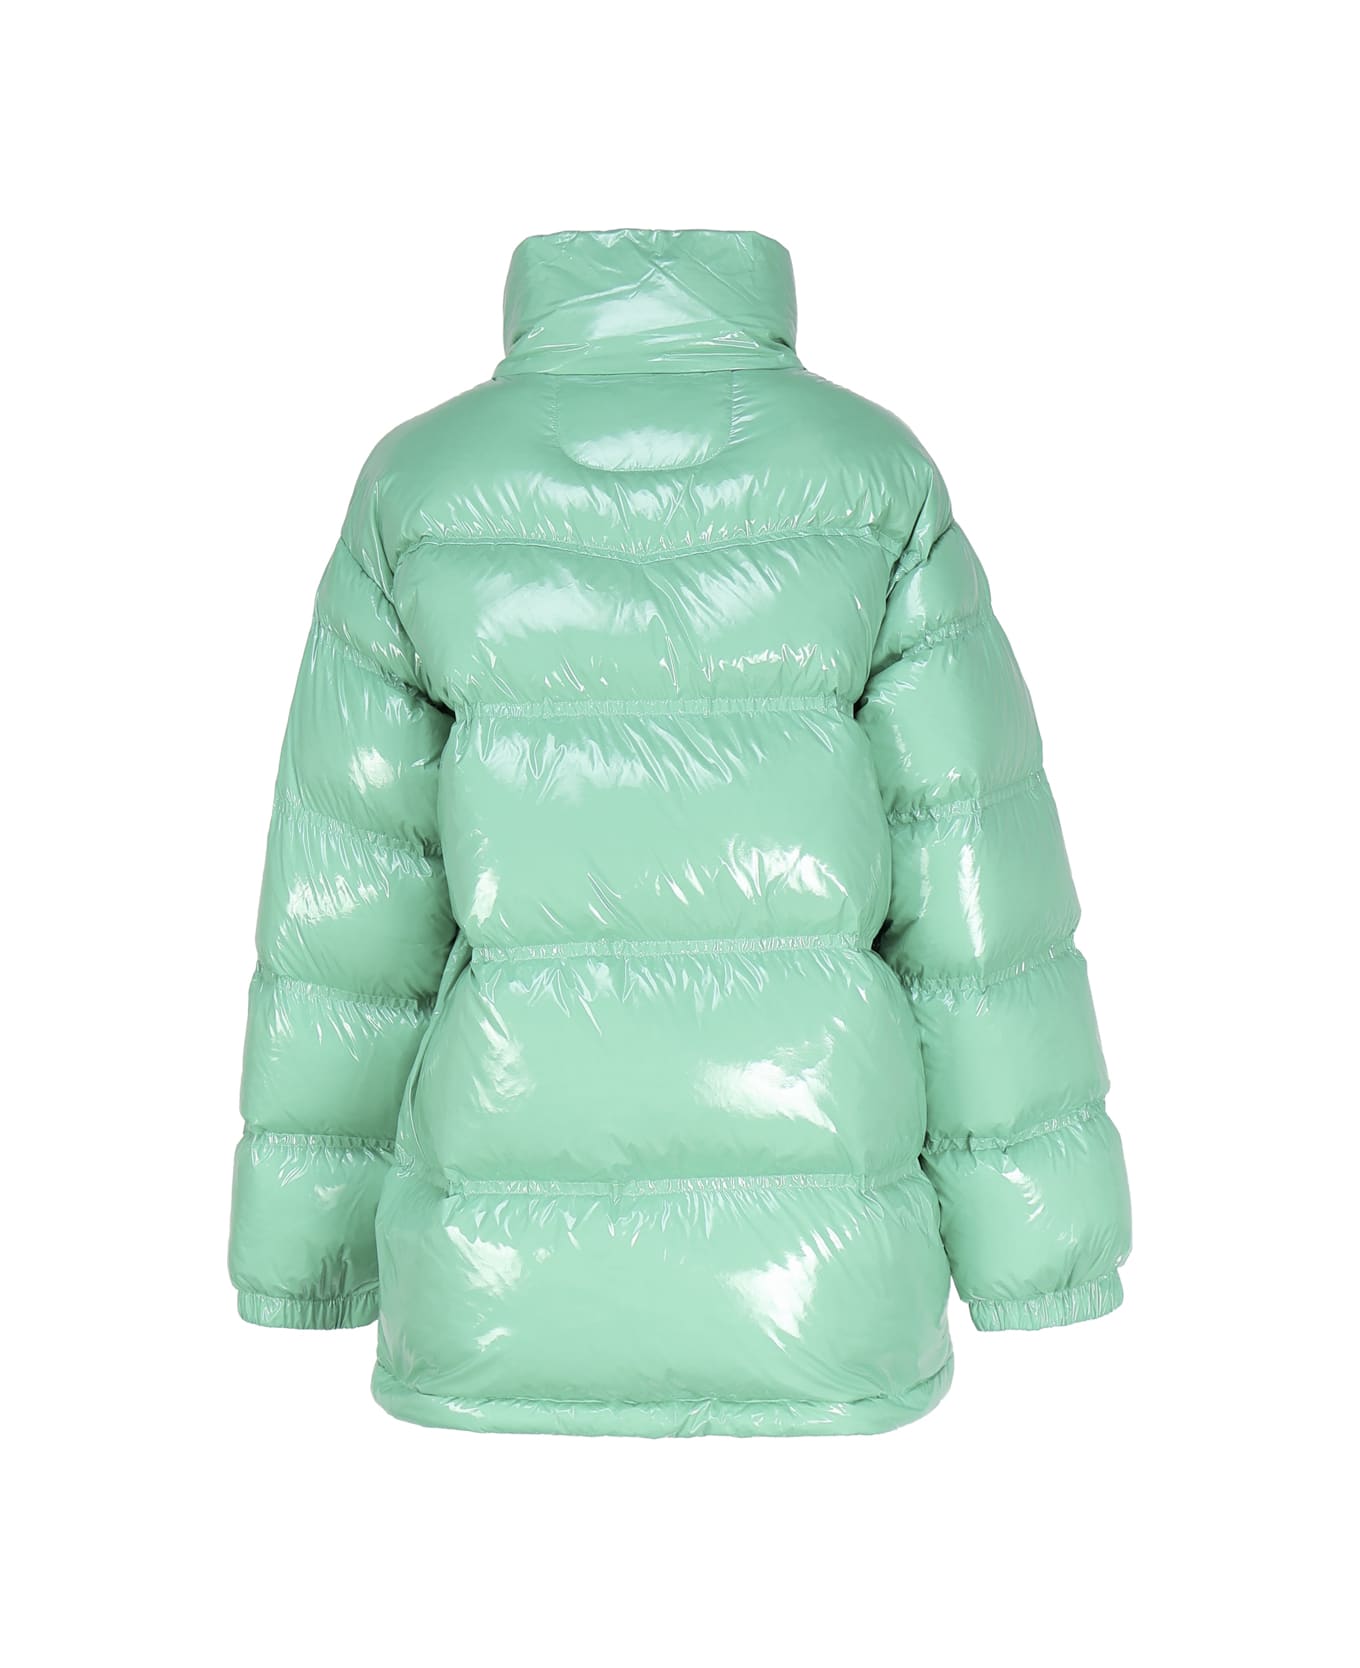 STAND STUDIO Shiny Effect Down Jacket - Green